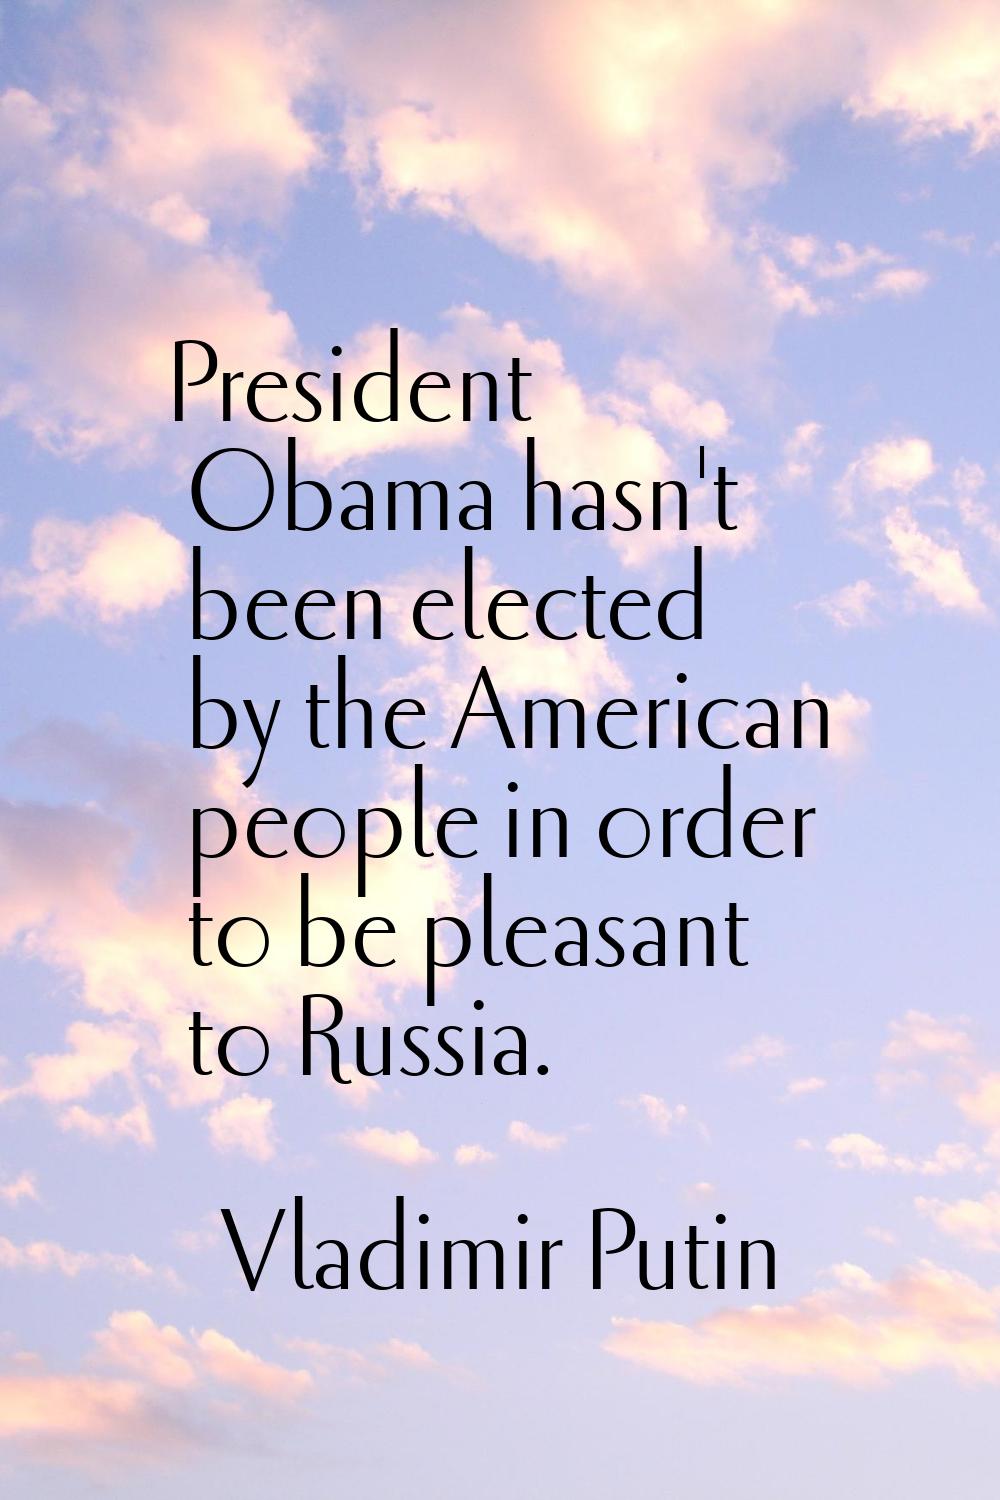 President Obama hasn't been elected by the American people in order to be pleasant to Russia.